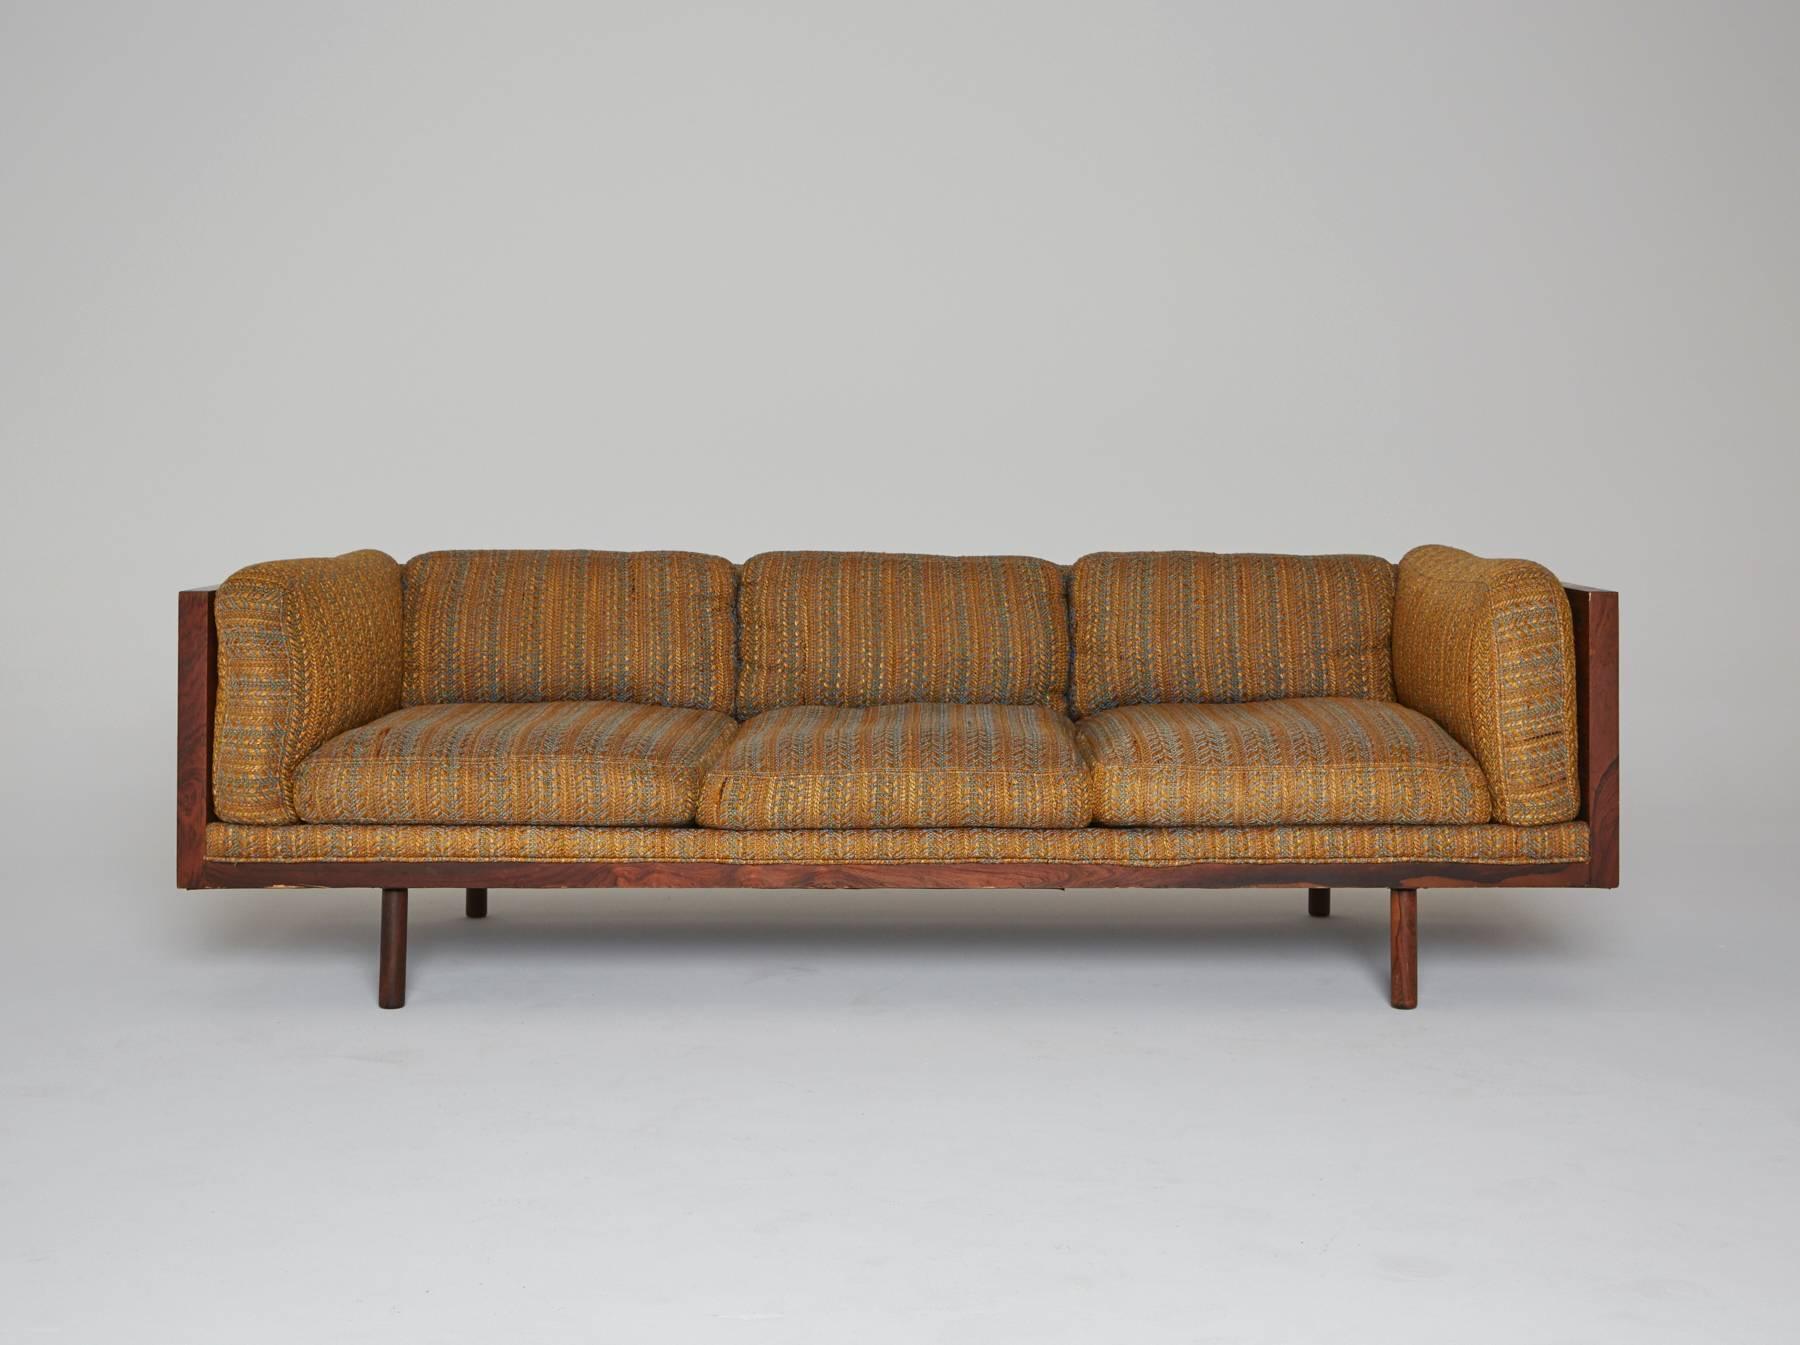 A coveted 1960s sofa designed by Milo Baughman for Thayer Coggin. Luxurious rosewood provides a beautiful frame encasement. This regal sofa appears to levitate, as it is elevated onto four wooden peg legs. The gold, woven upholstery has great